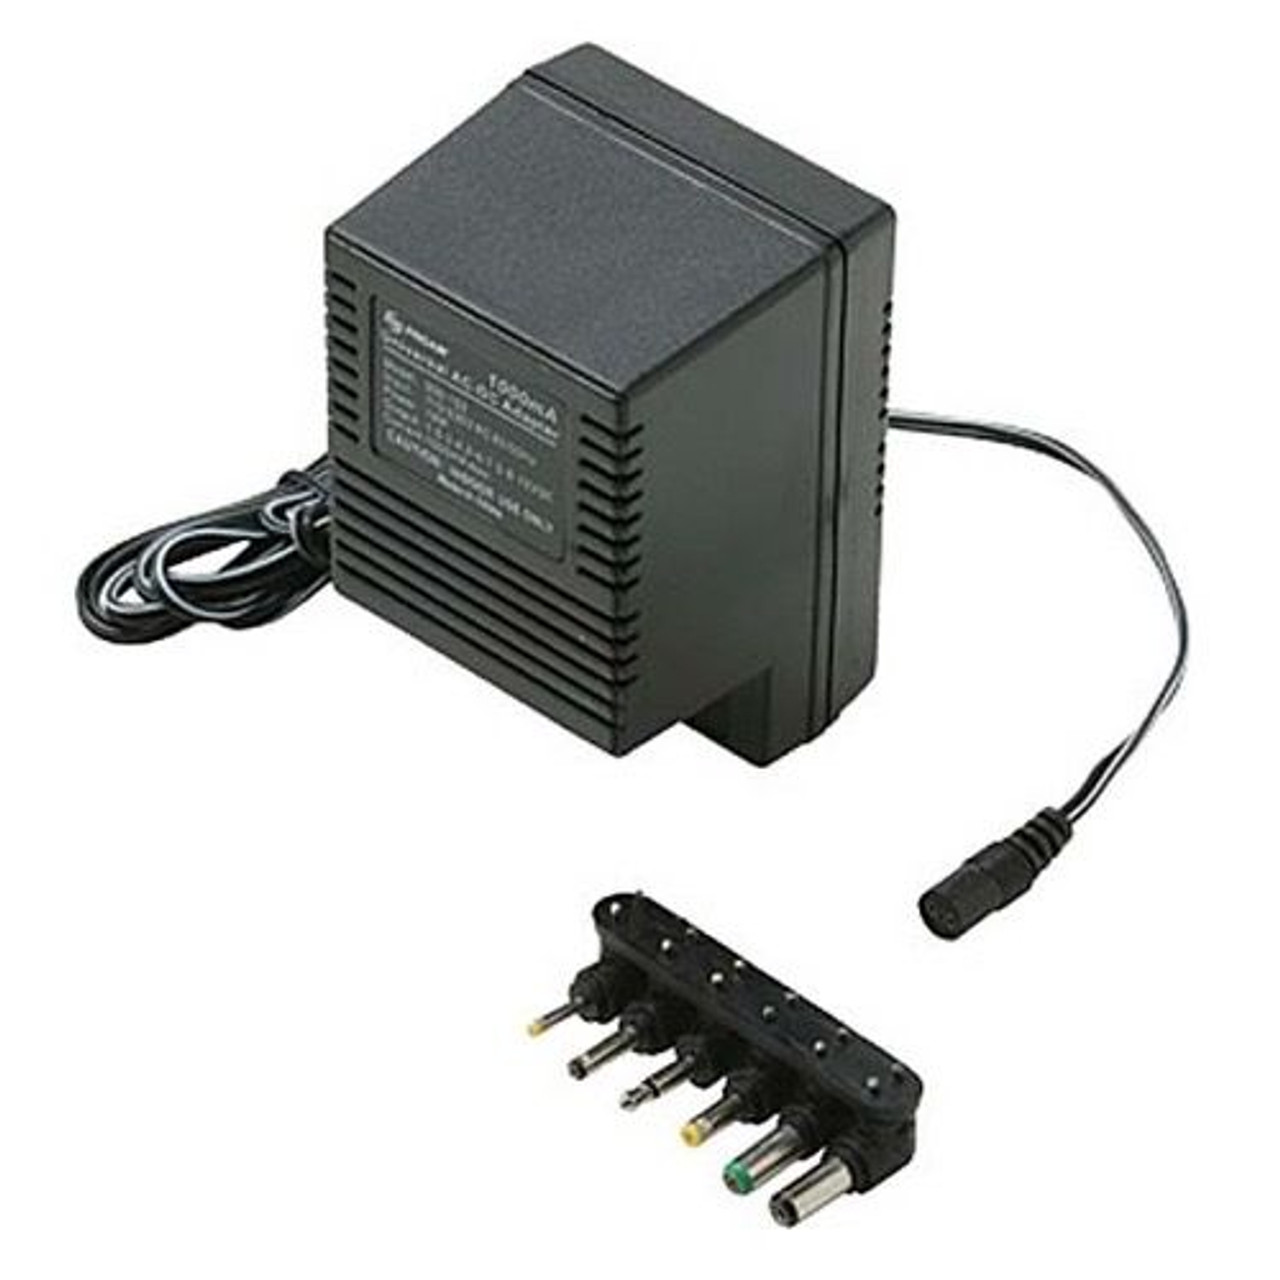 Eagle Universal AC/DC Adapter Power Supply Converter 1000mA Max with 6 Detachable Plugs AC DC Power Adapter Supply 110-220 VAC Switchable Voltage Outputs 3, 4.5, 6, 7.5, 9, 12 VDC